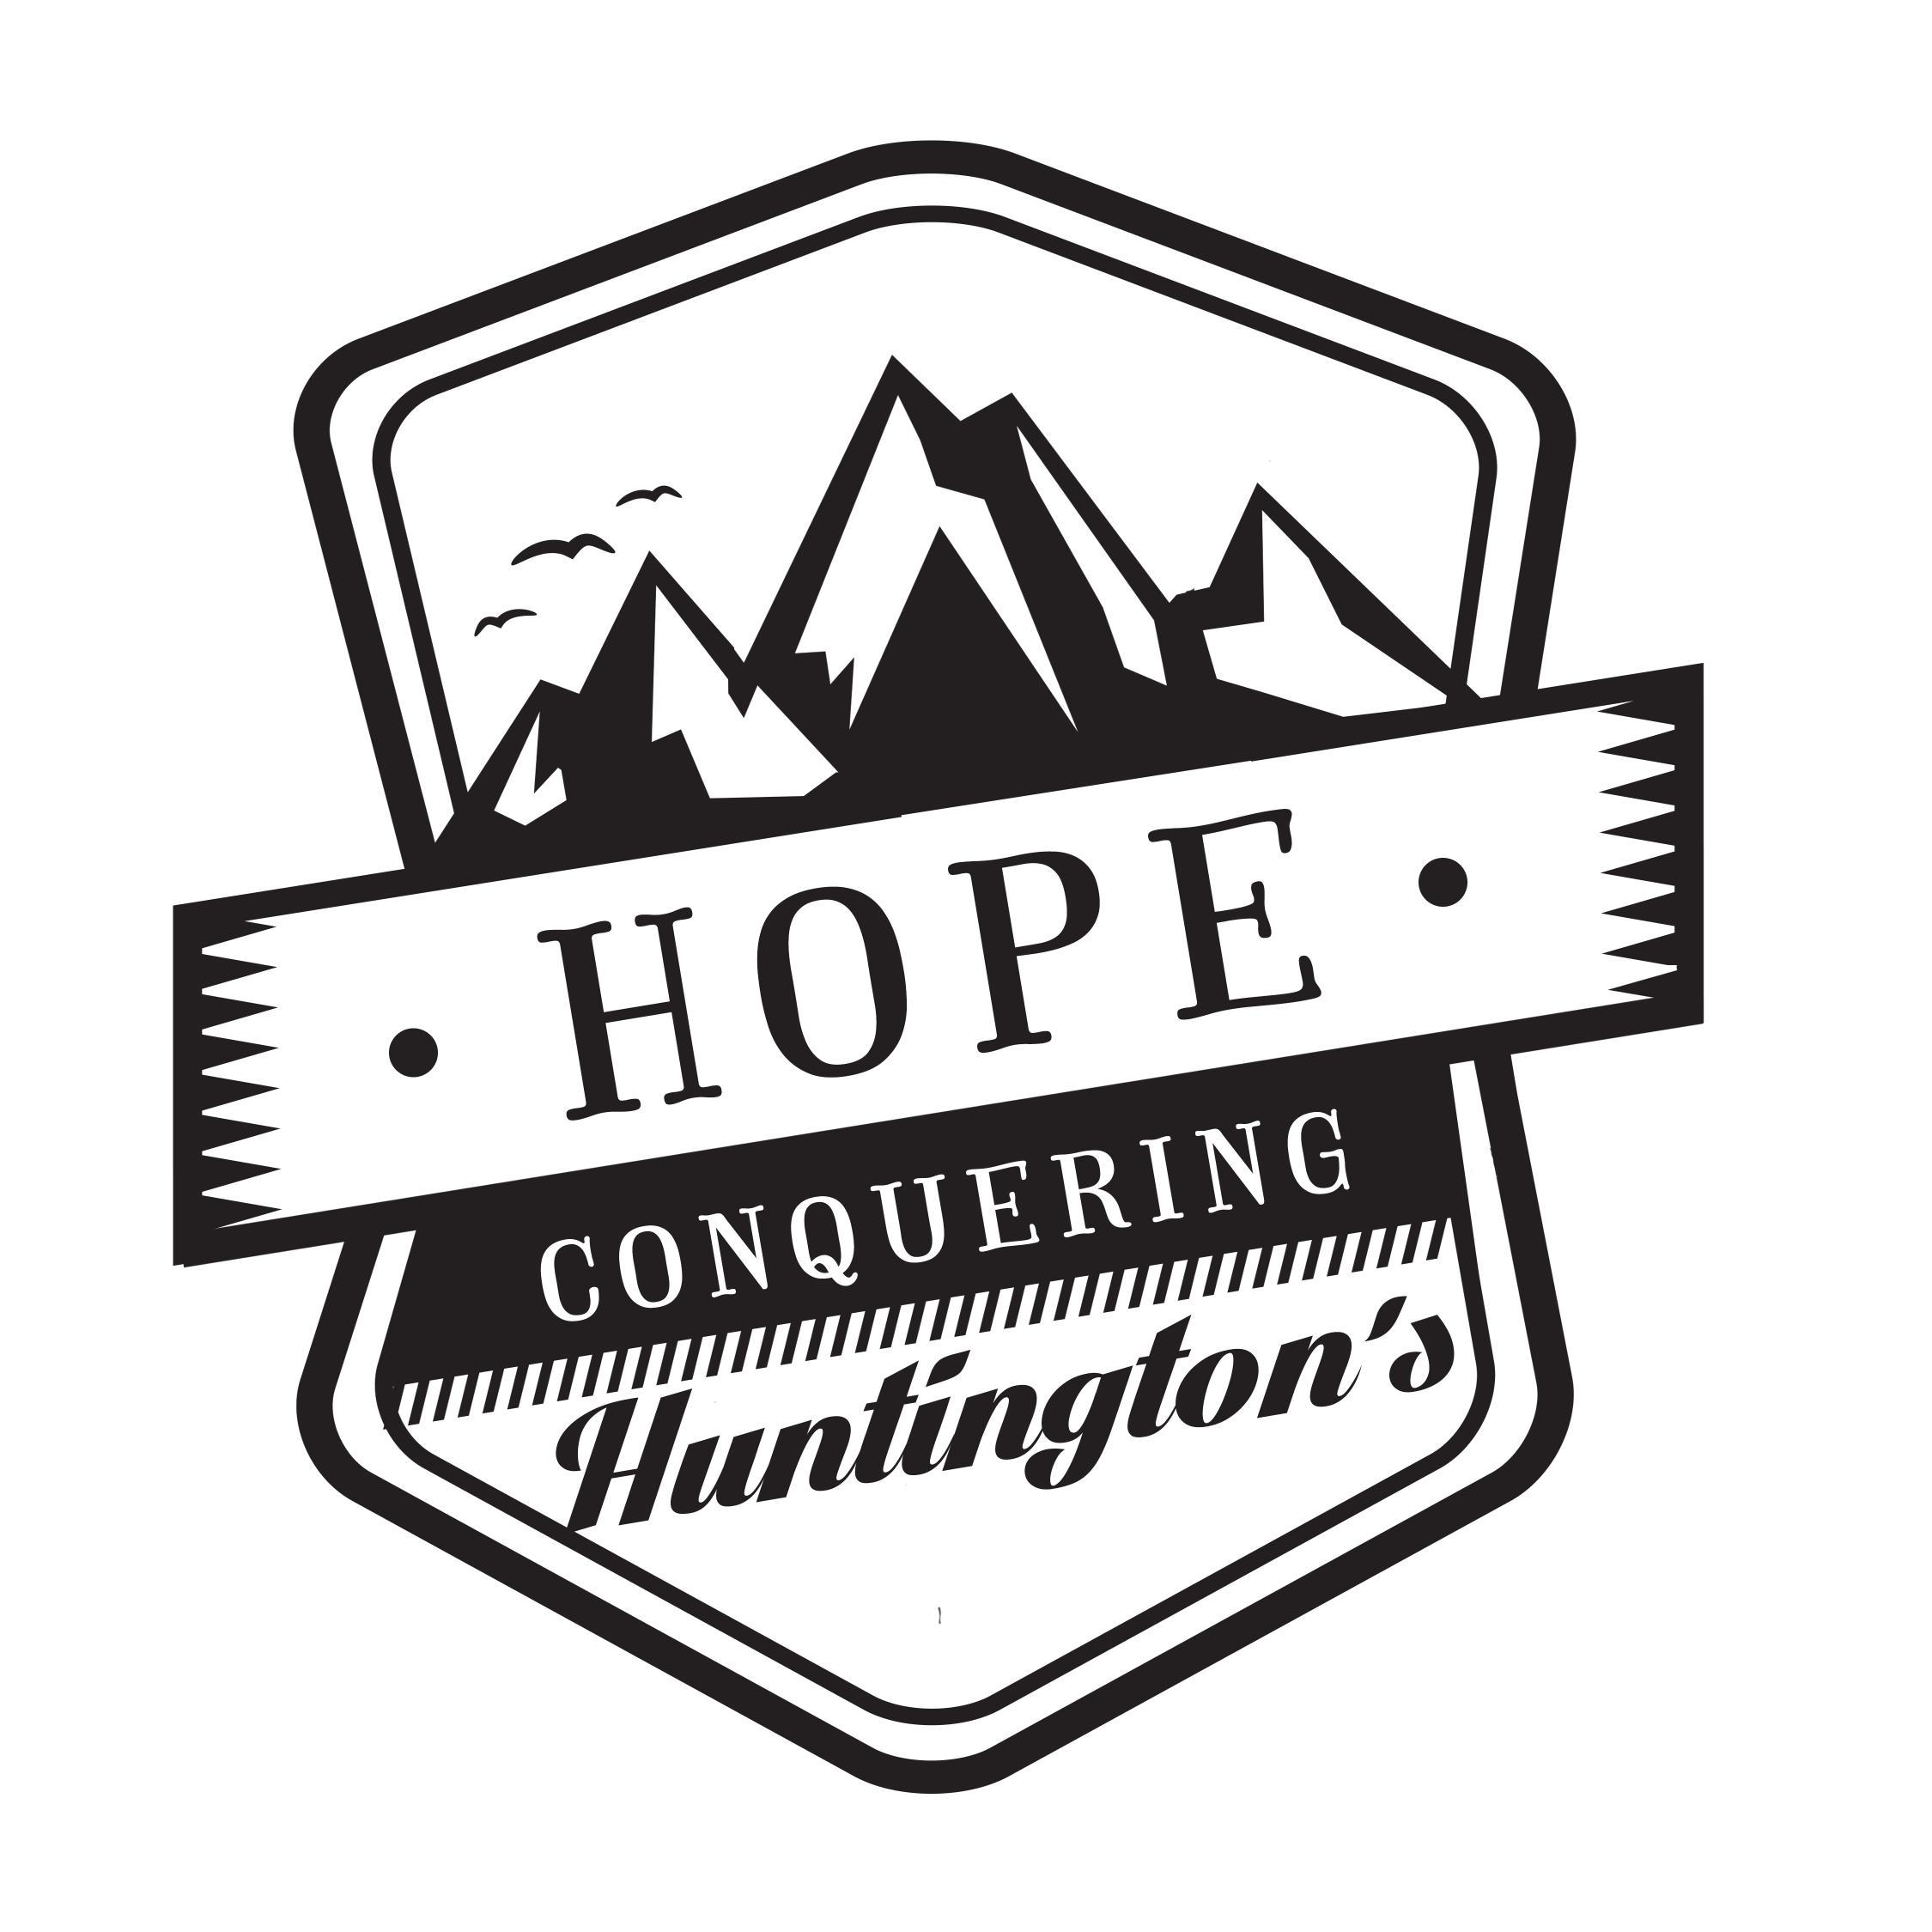 Our mission is to provide support for Northern Colorado families affected with Huntington's Disease.